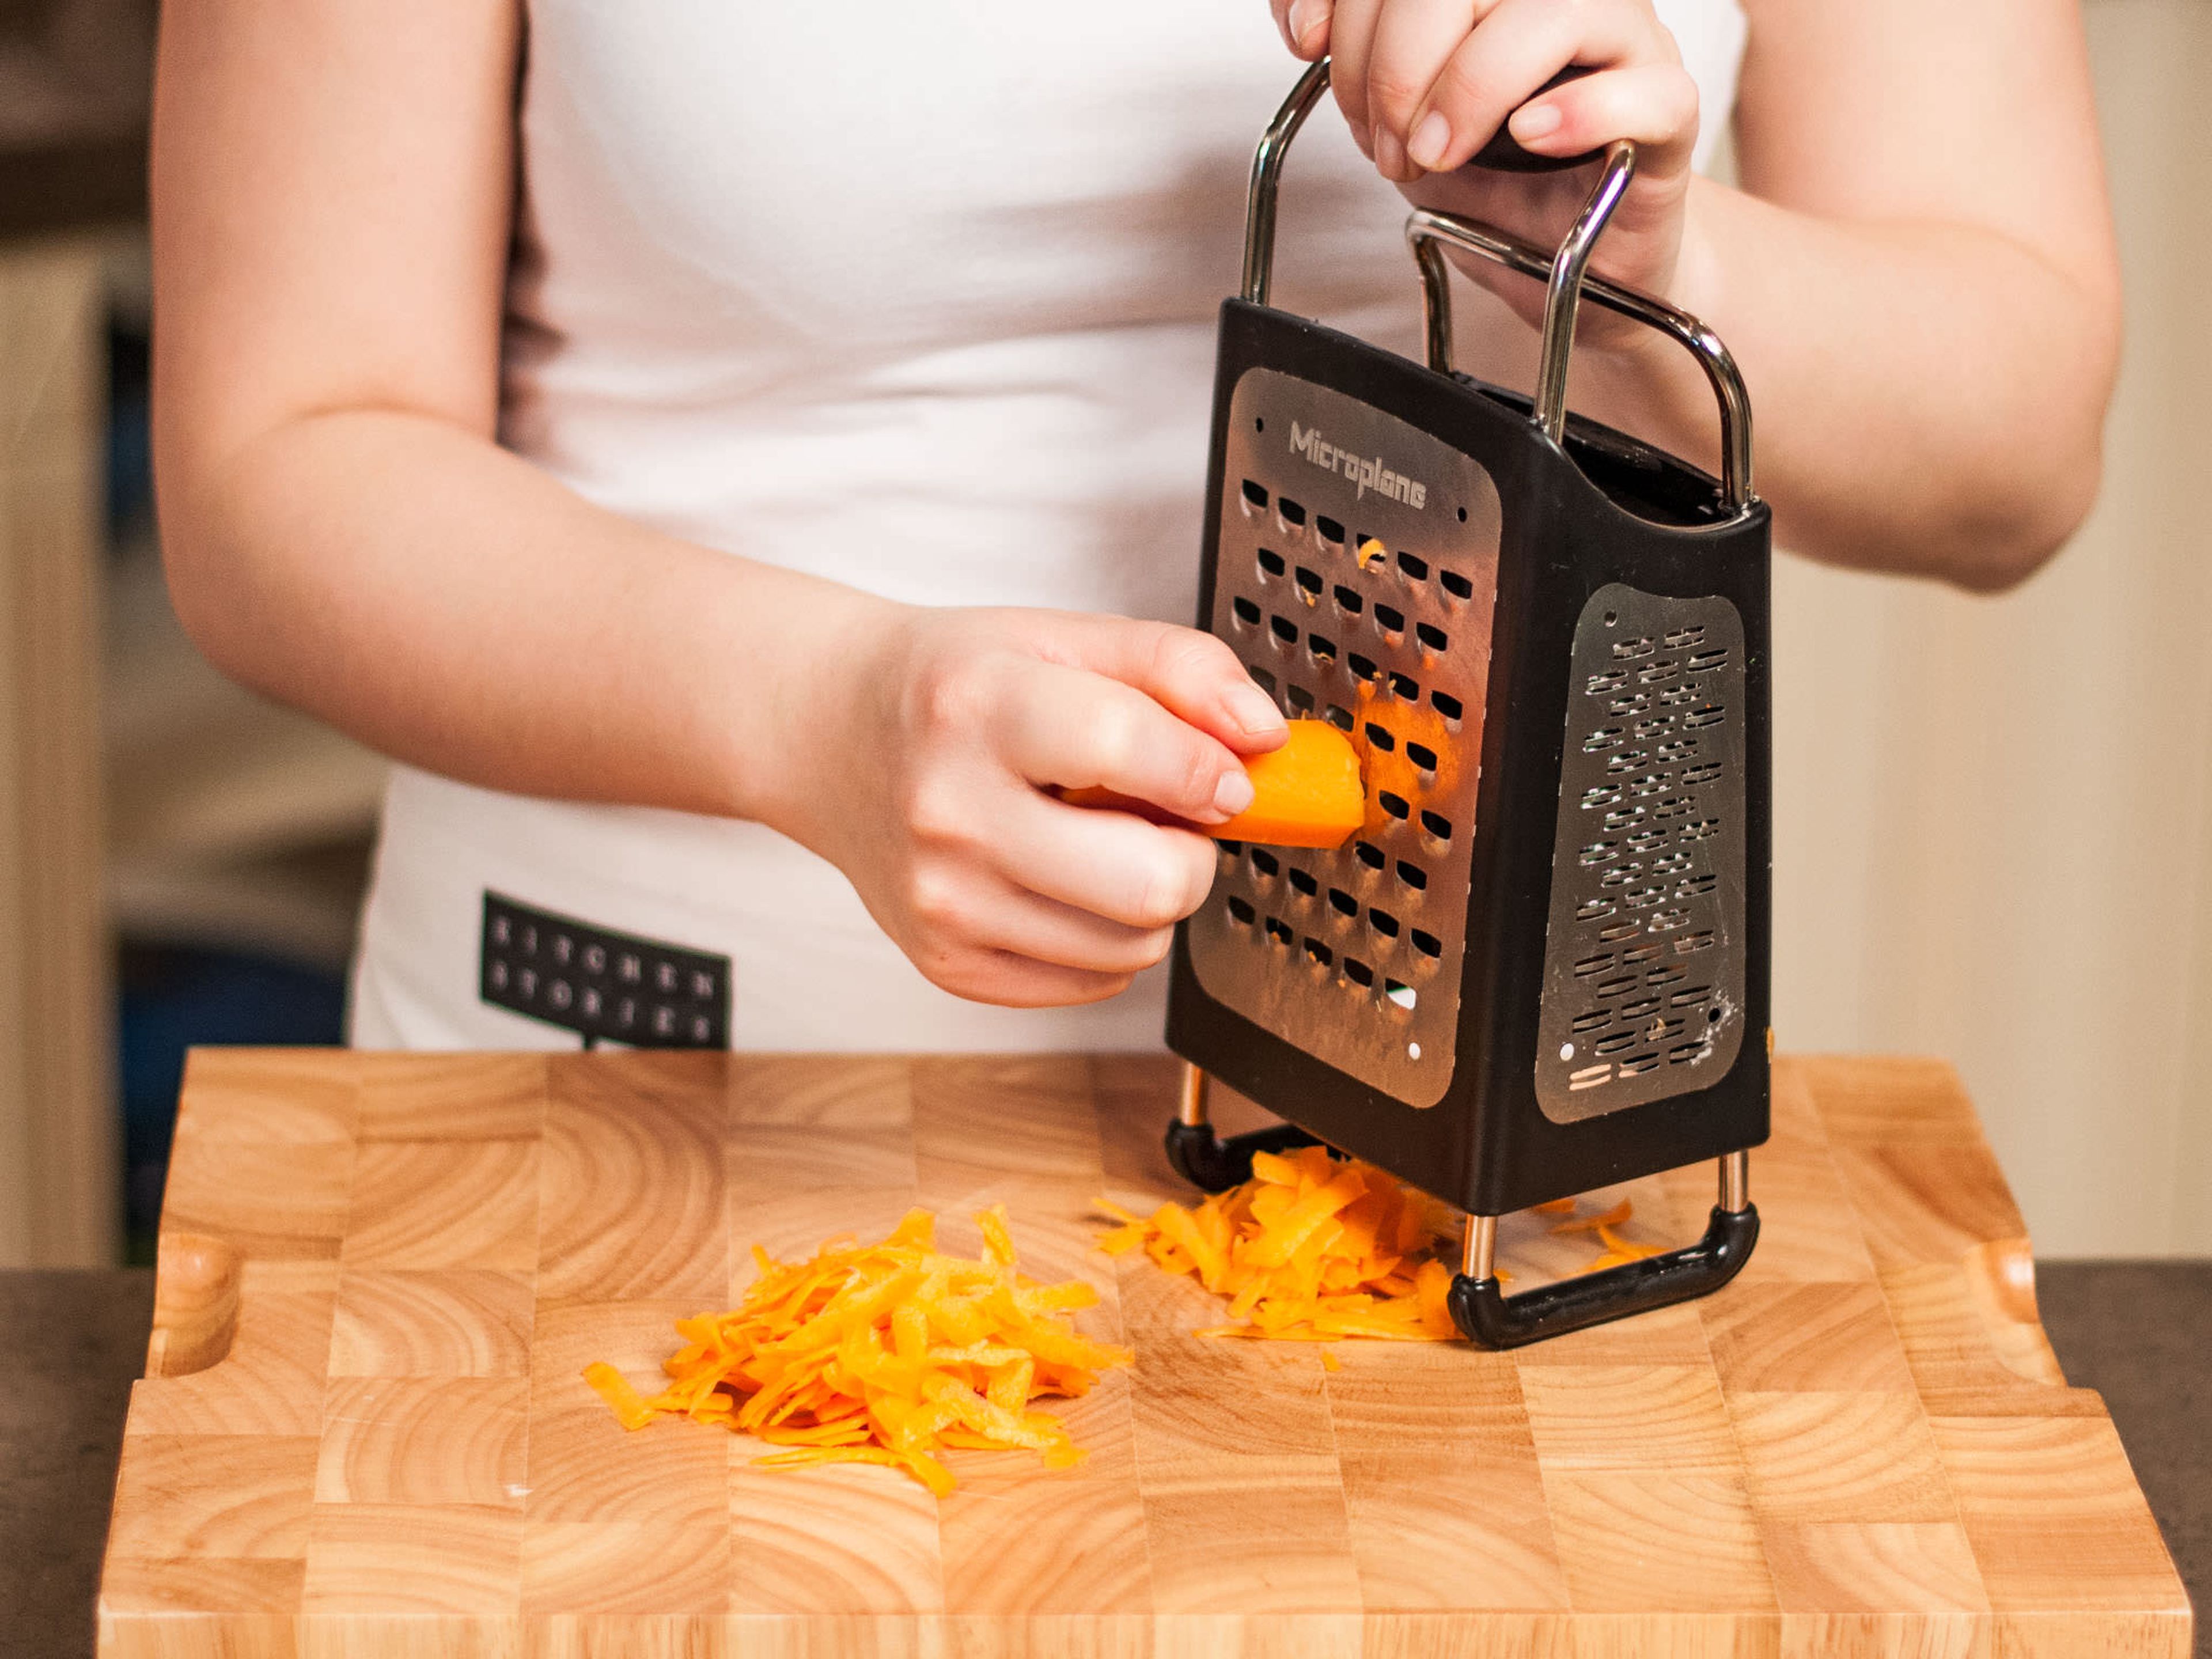 Preheat oven to 180°C/355°F. Peel and finely grate carrots.